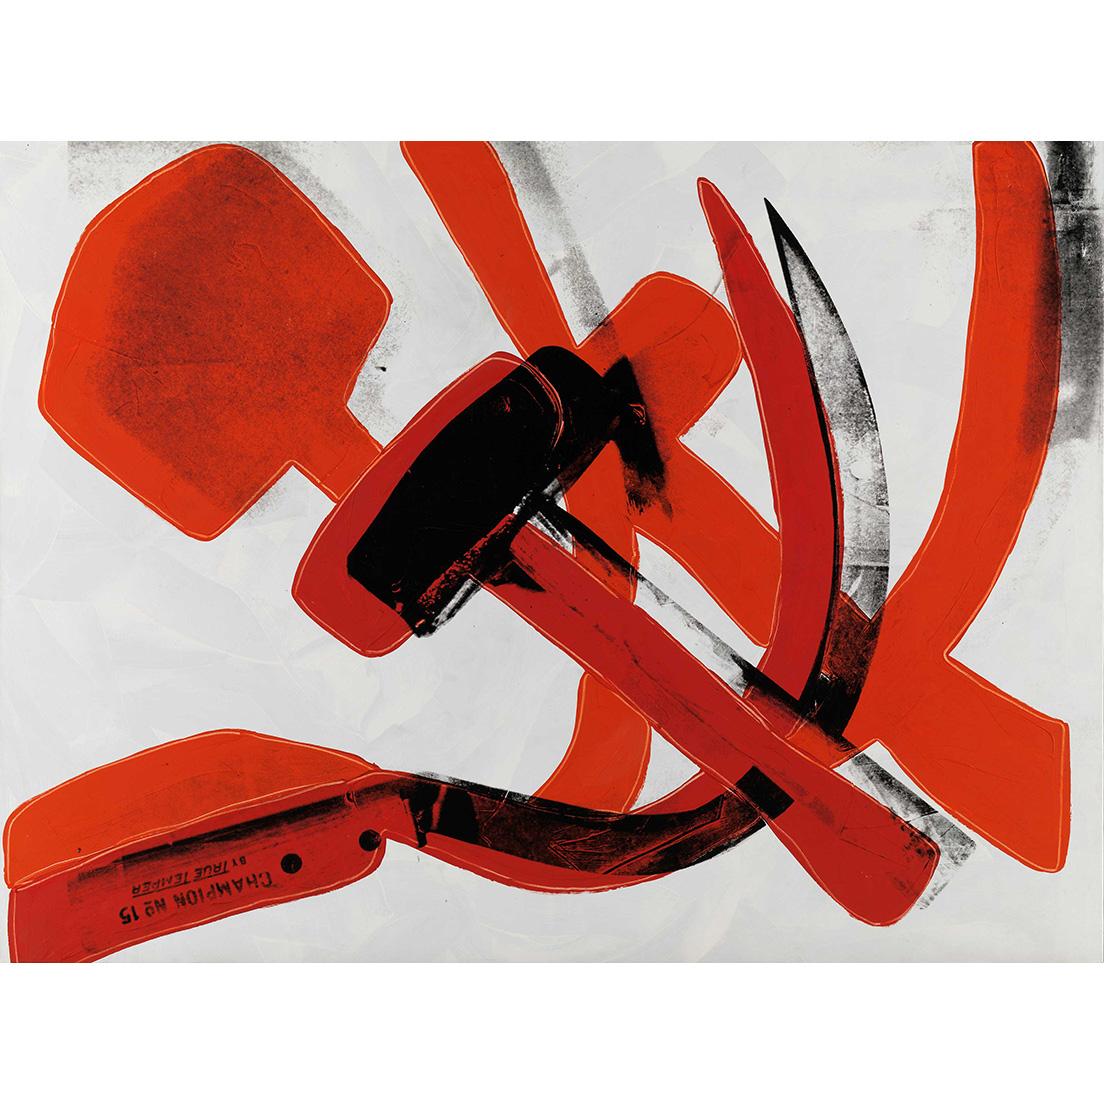 《Hammer and Sickle》（1967年）Museum Brandhorst　© 2020 The Andy Warhol Foundation for the Visual Arts, Inc./ Licensed by DACS, London.